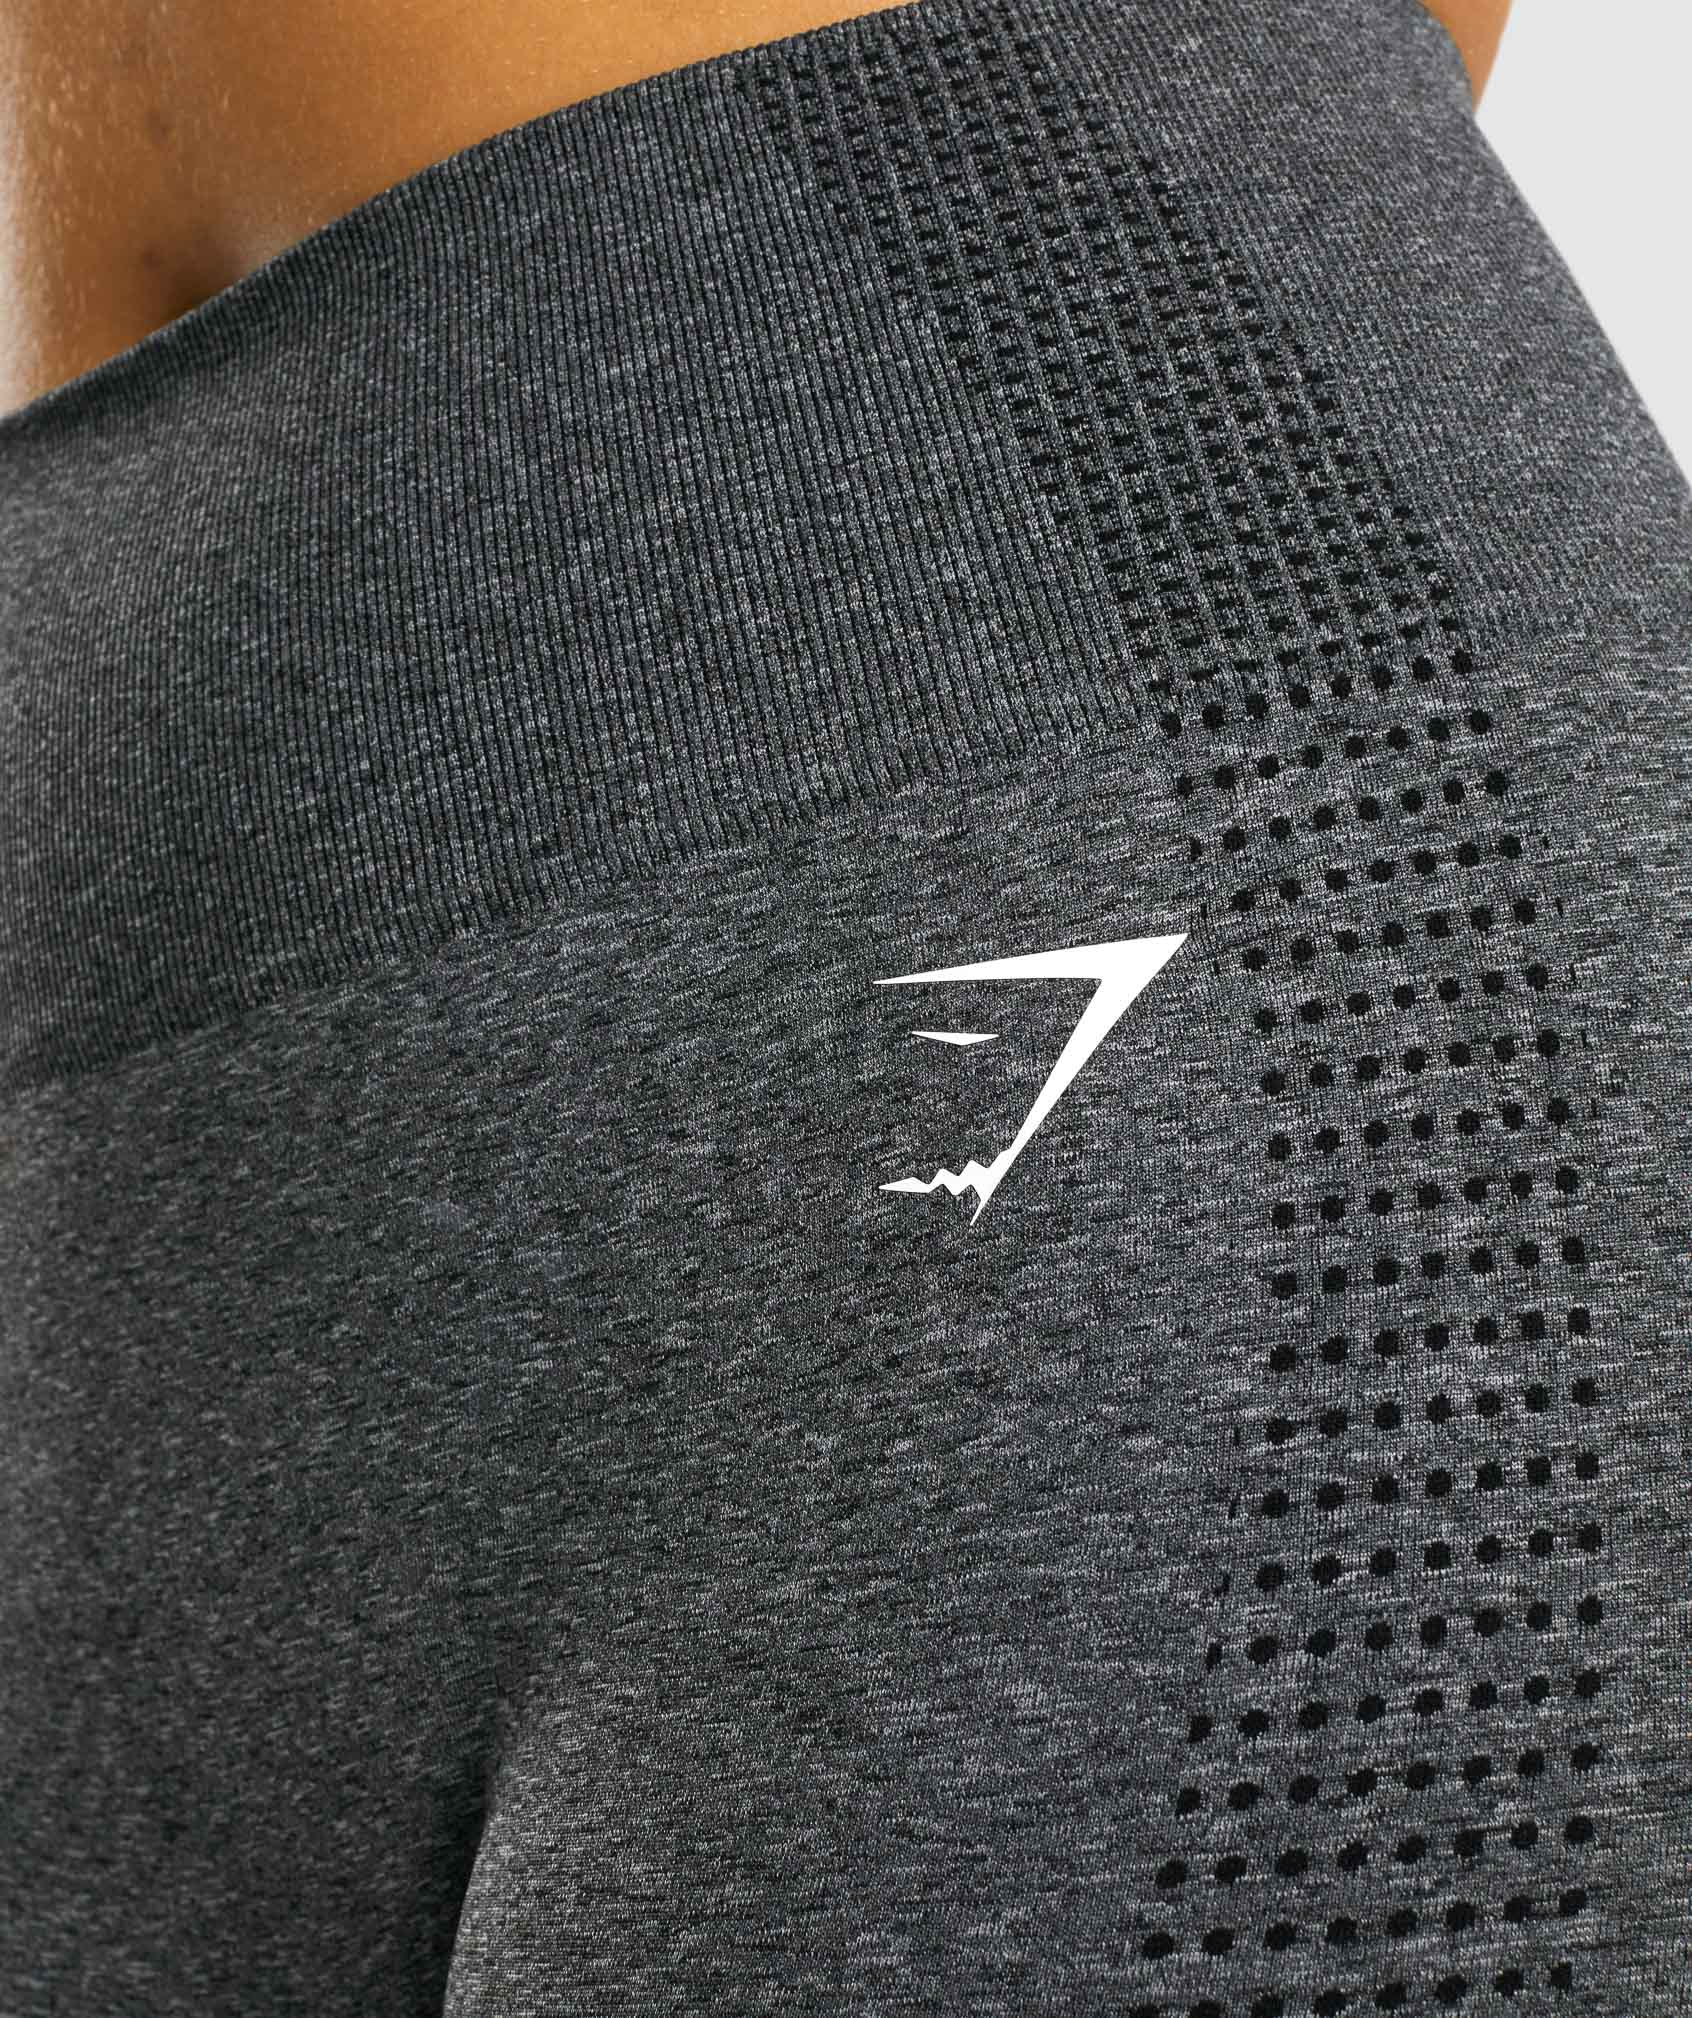 GYMSHARK - NEW Charcoal Grey Speed Leggings - Size Small